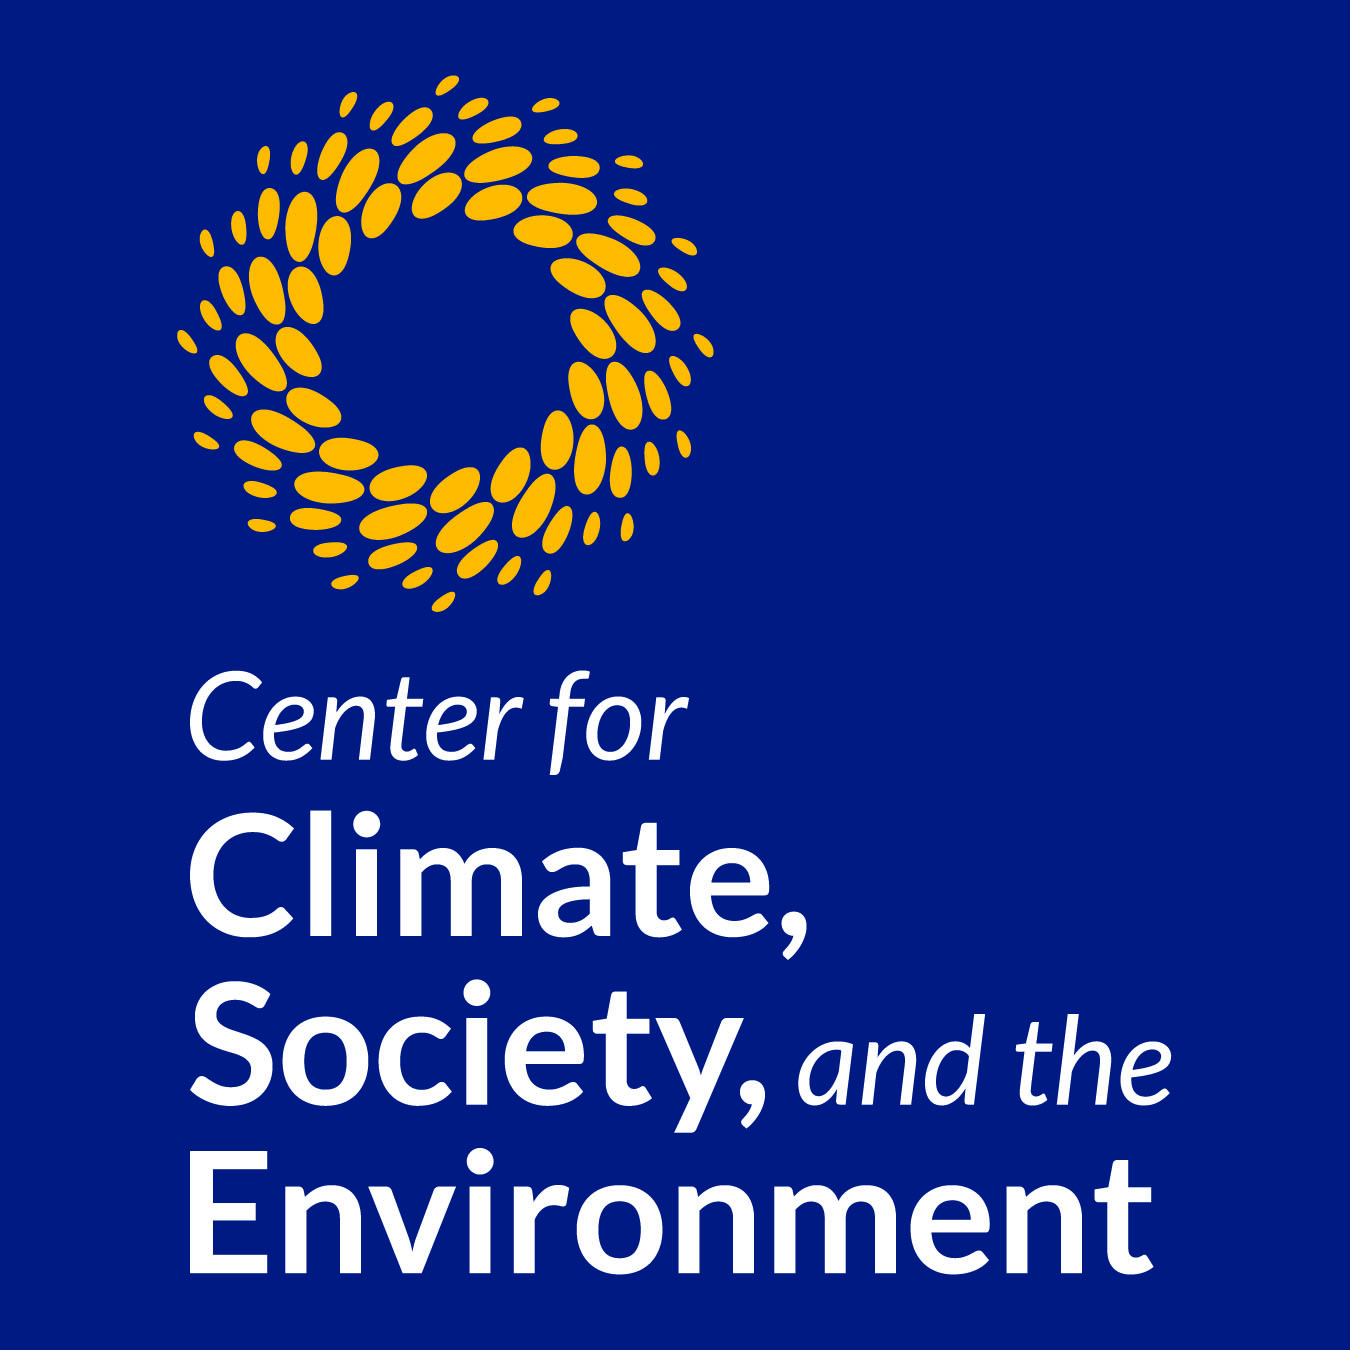 Sunburst logo for the Center for Climate, Society, and the Environment